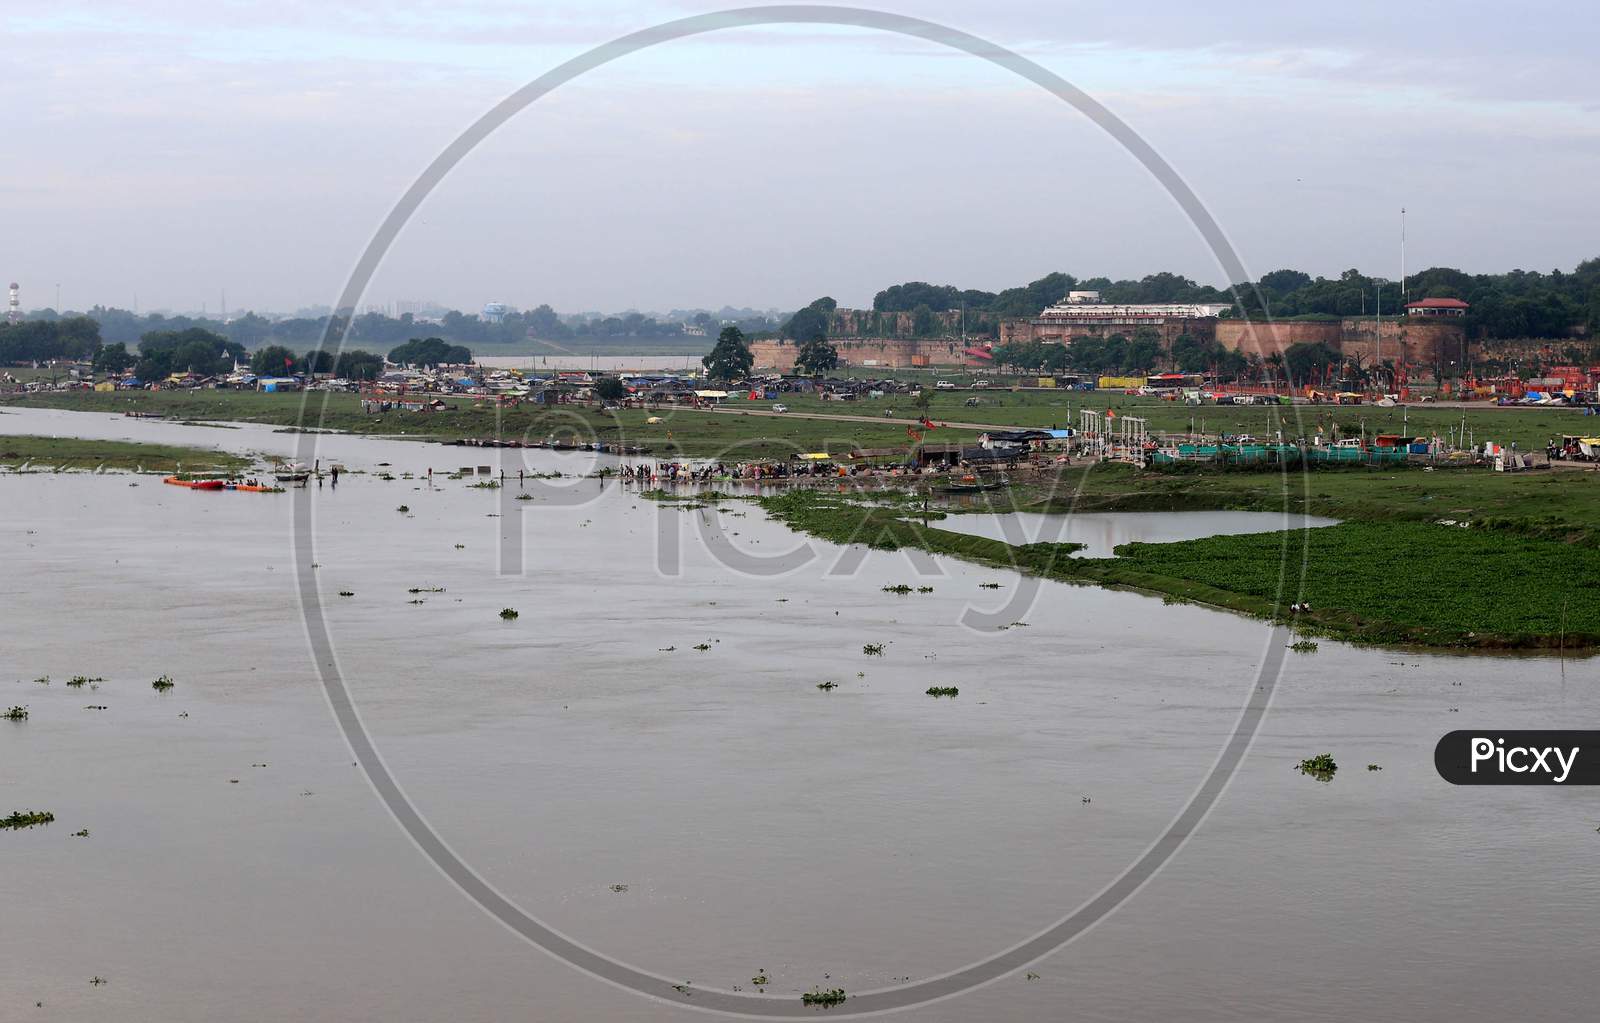 A View Of Ghats Submerged In The Flooded Water Of River Ganga And Yamuna During Heavy Rain In Prayagraj, August 23, 20202